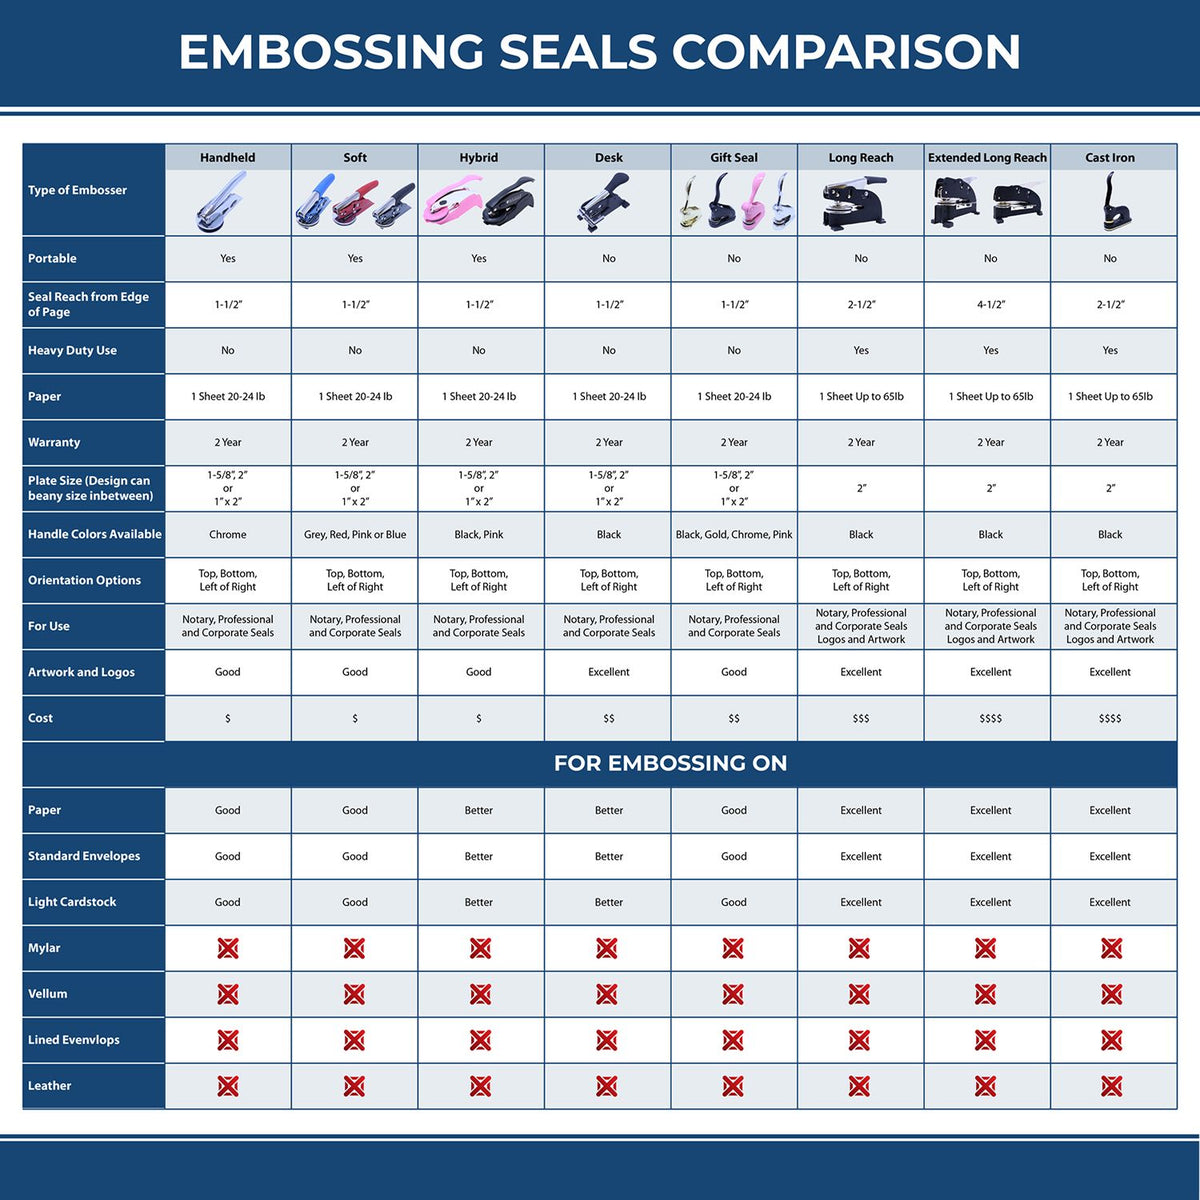 A comparison chart for the different types of mount models available for the Extended Long Reach Connecticut Architect Seal Embosser.